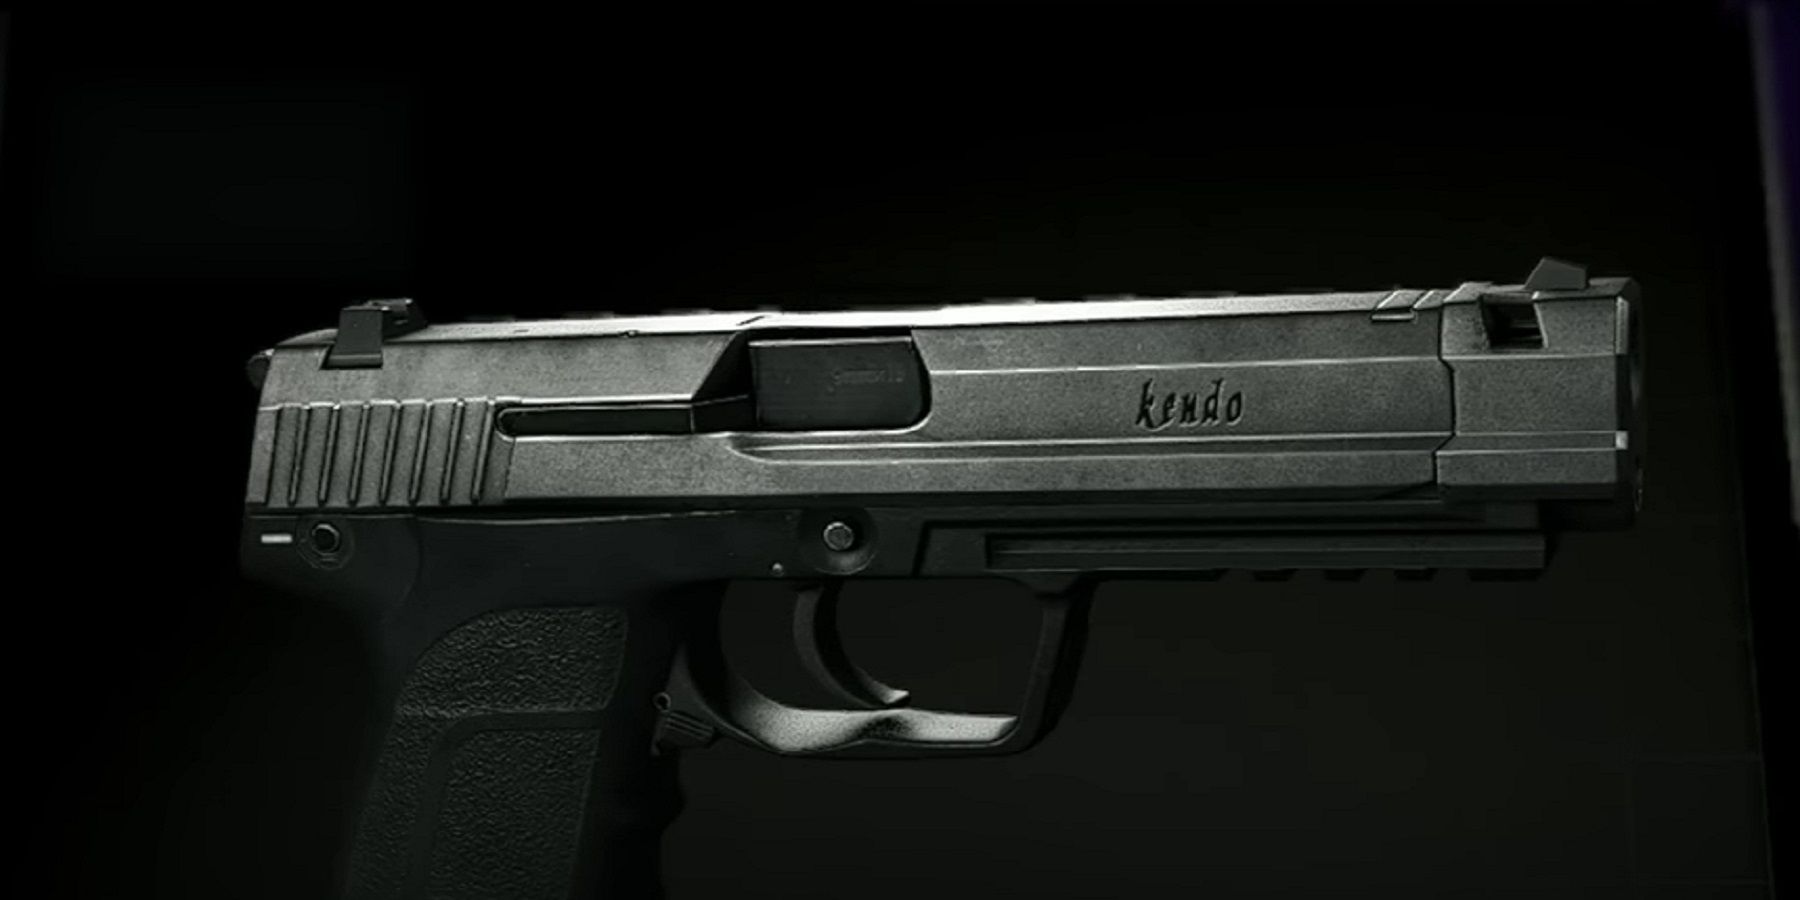 Leon's SG-09 handgun with a "Kendo" engraving on it.